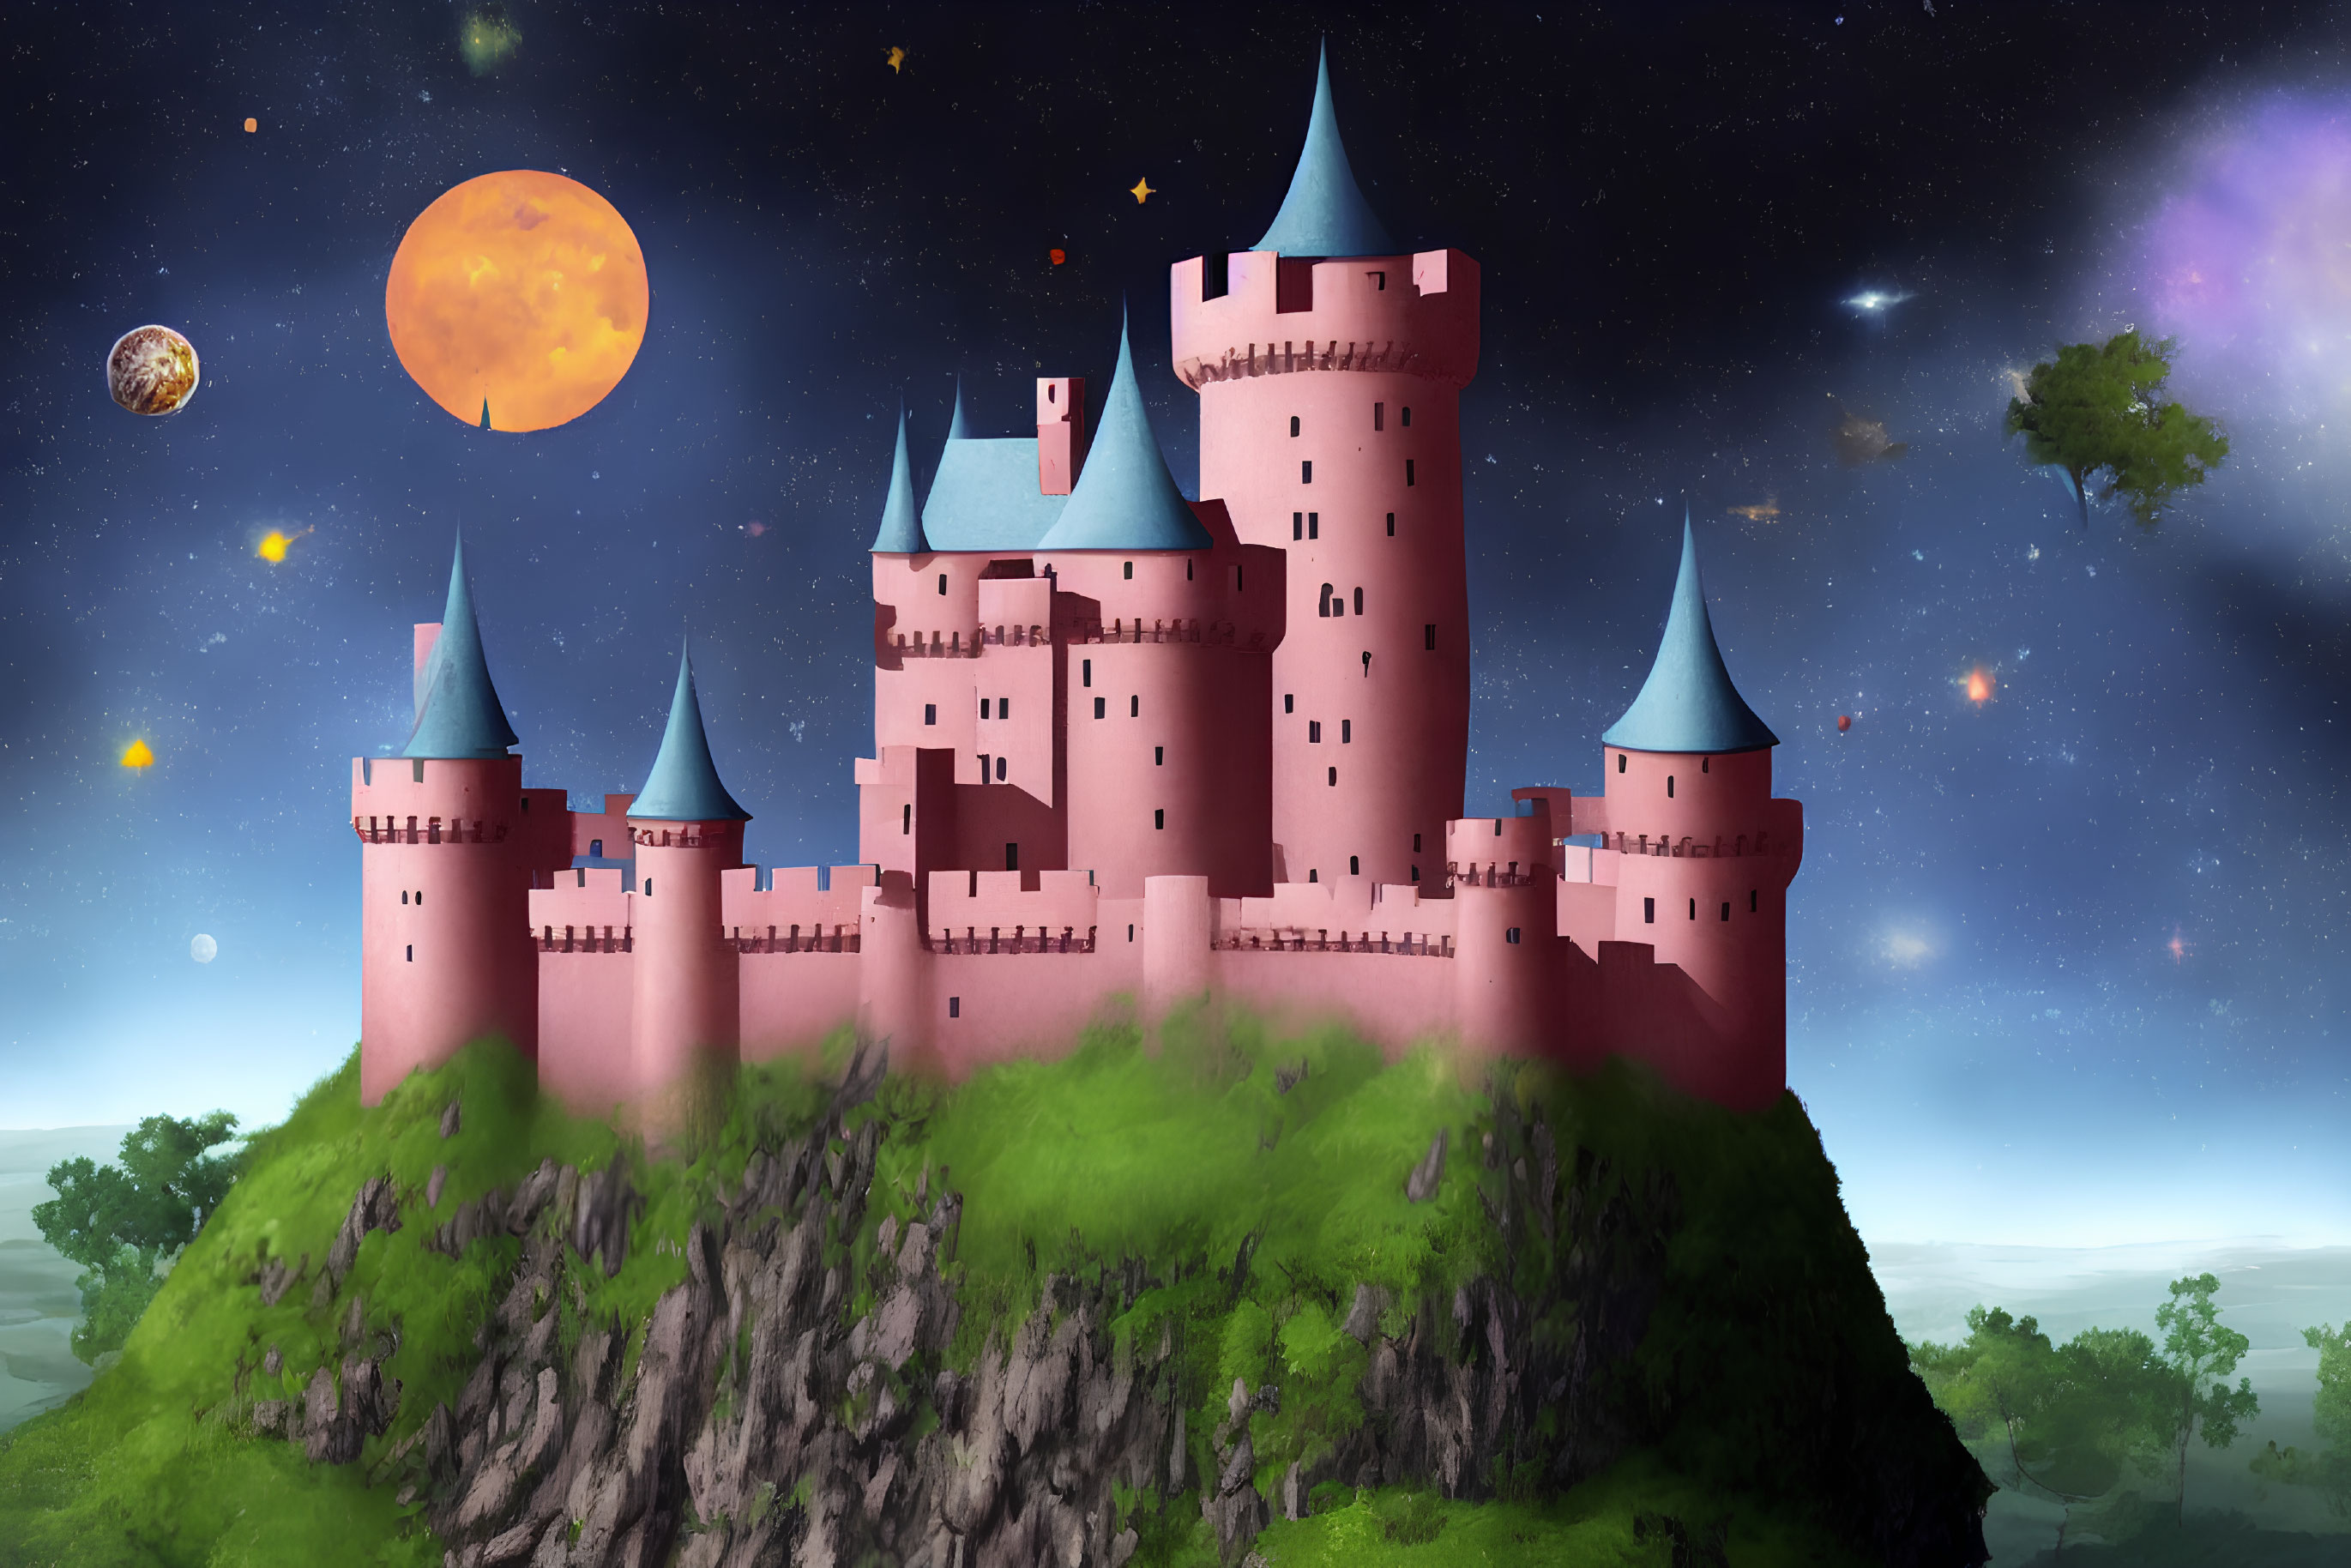 Pink castle on lush hill under night sky with moon & galaxies